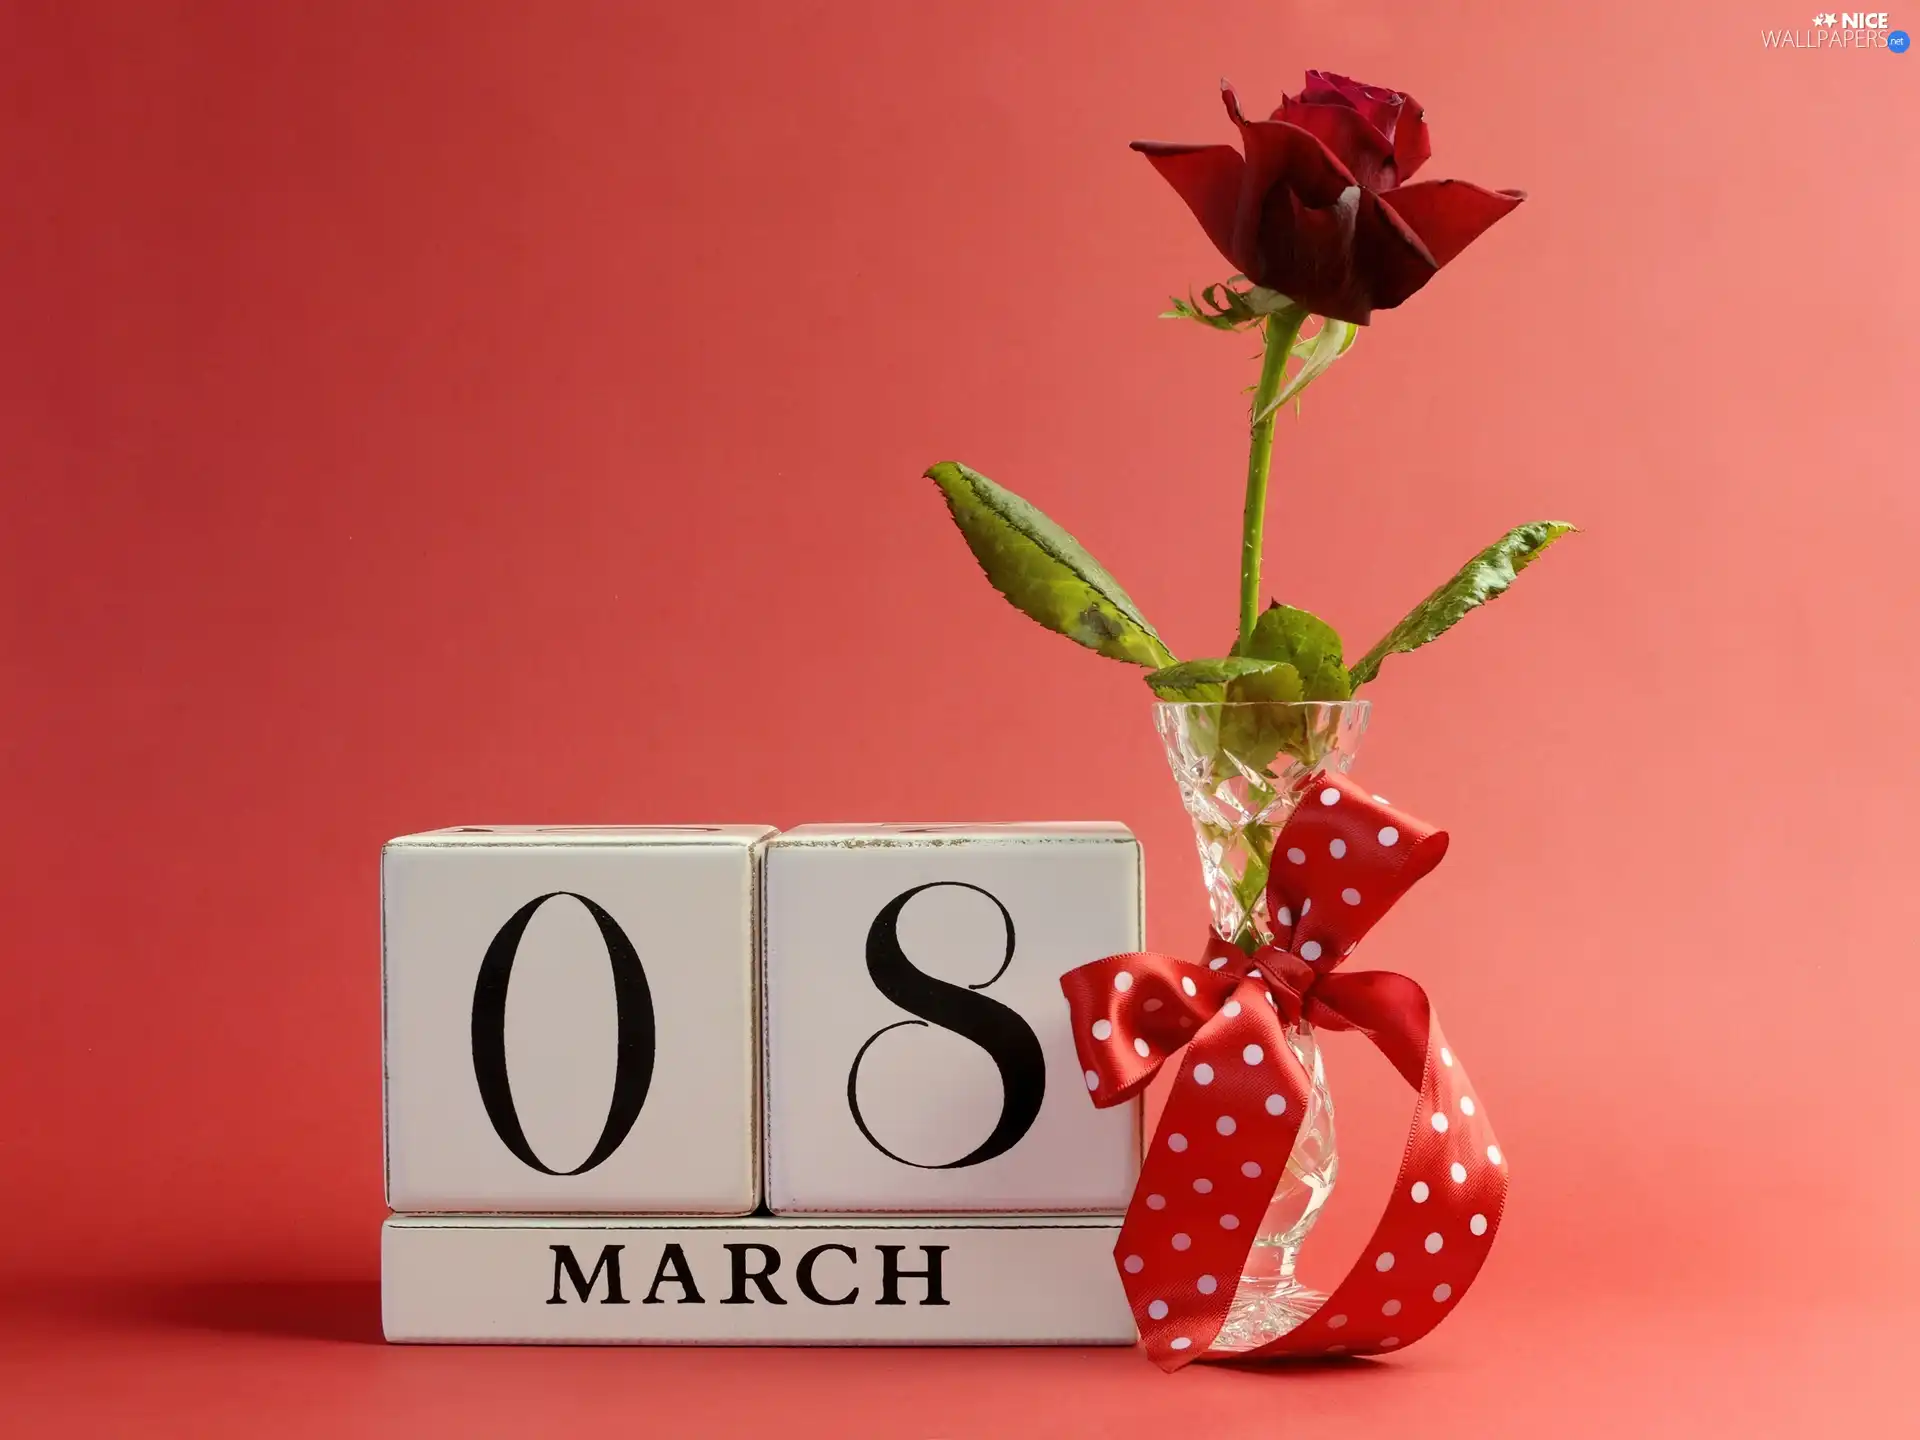 March 8, women, rose, day